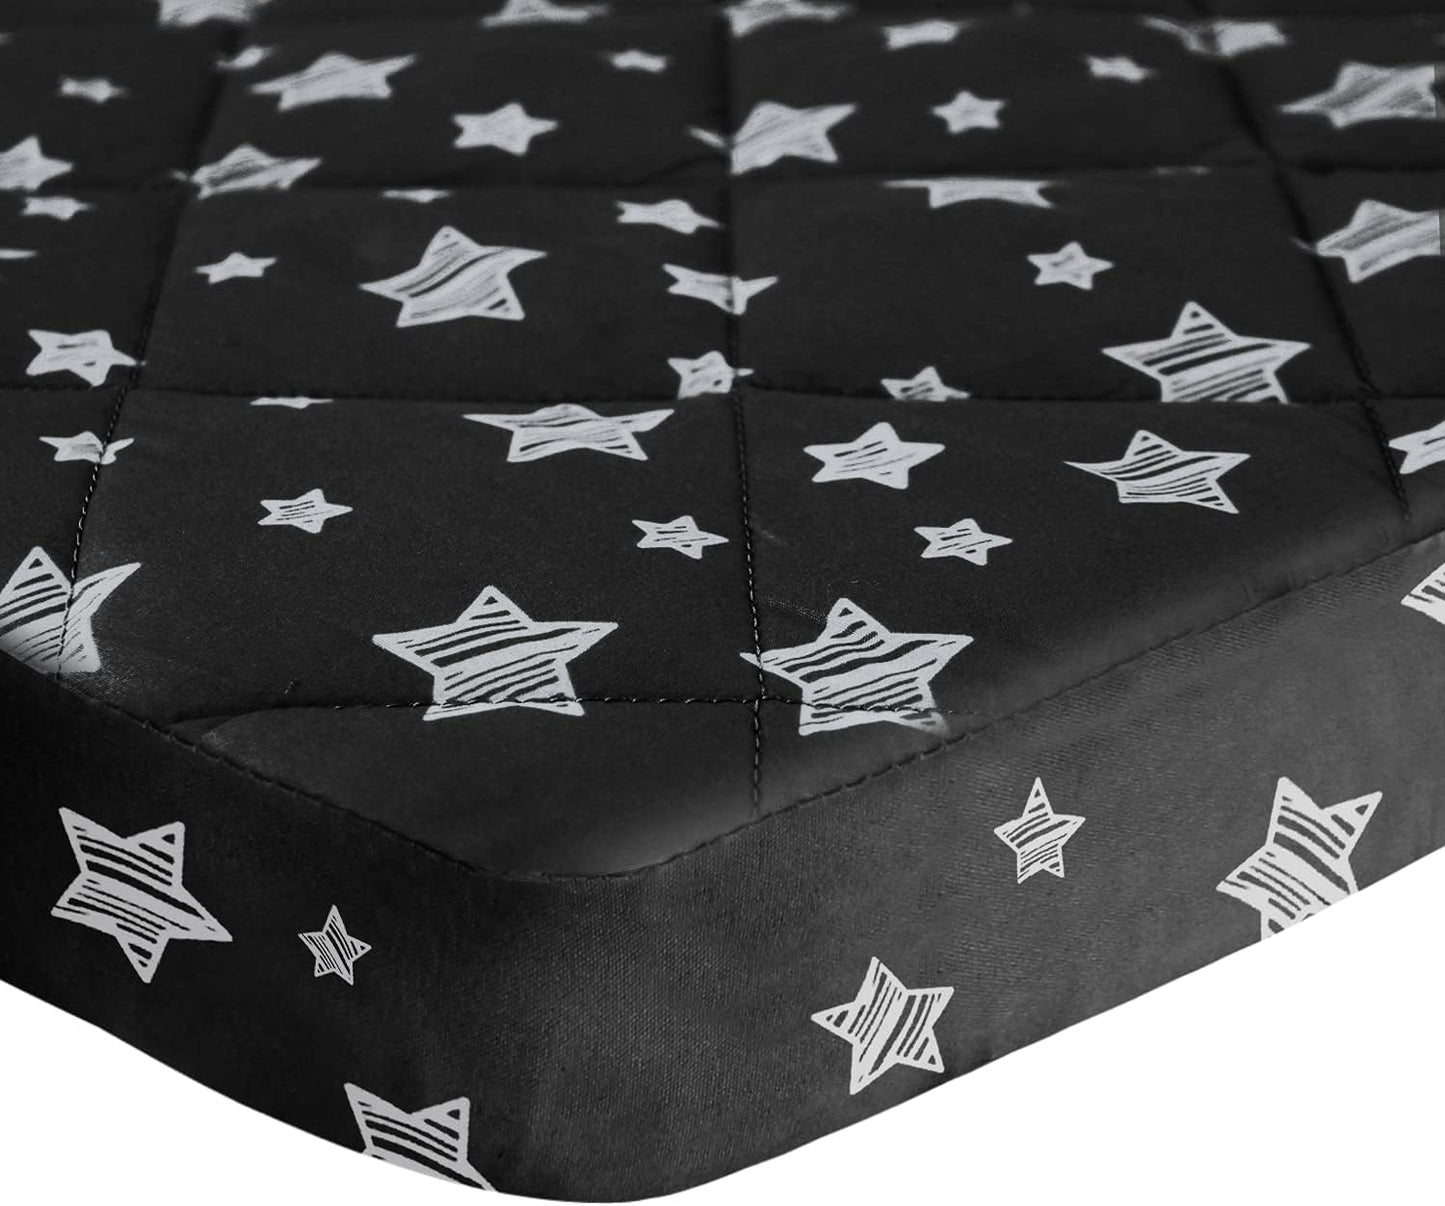 Pack n Play Sheet Quilted | Mini Crib Sheet - Pack and Play Mattress Pad Cover, Ultra-Soft Microfiber, Fits Graco Pack and Play, Black Star